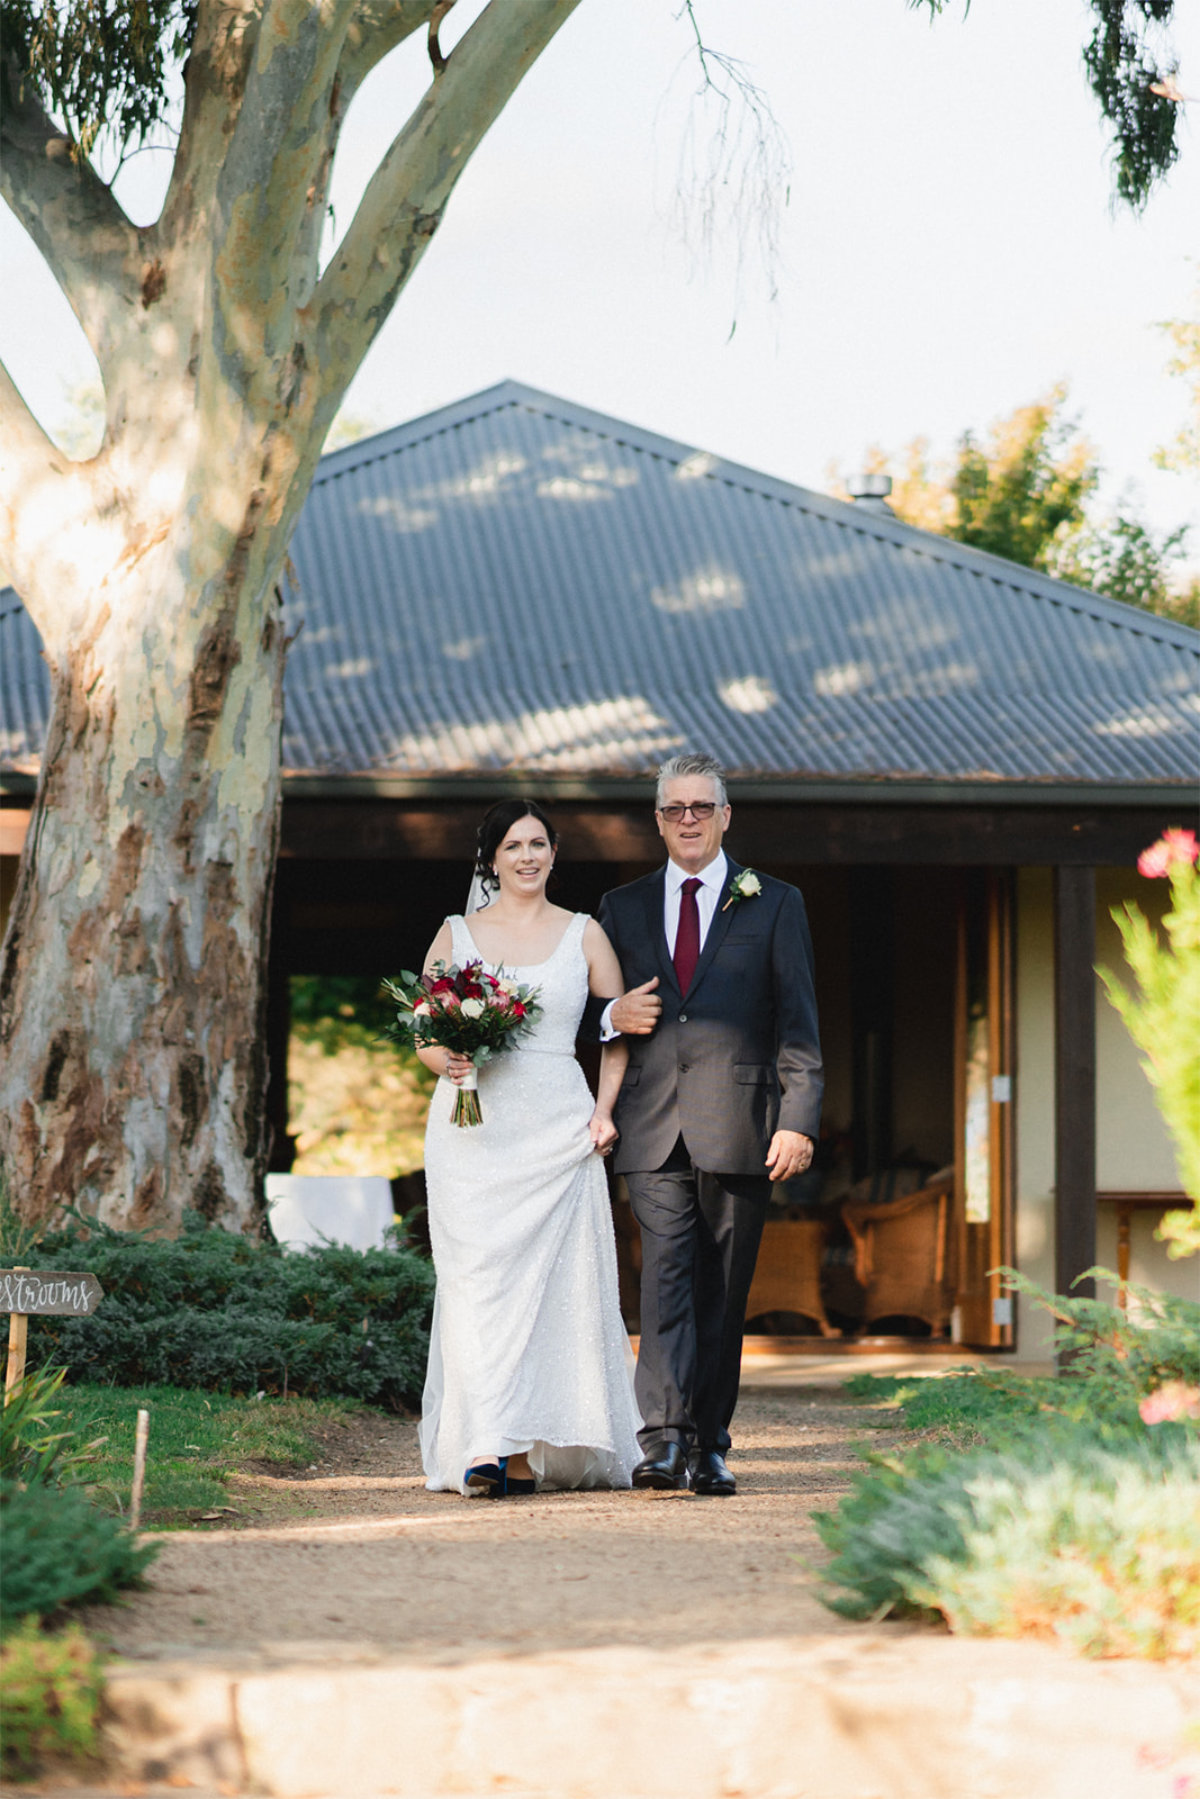 Helen's Hill Winery wedding for Jen and Cam. Photographed by Alex Colcheedas Photography